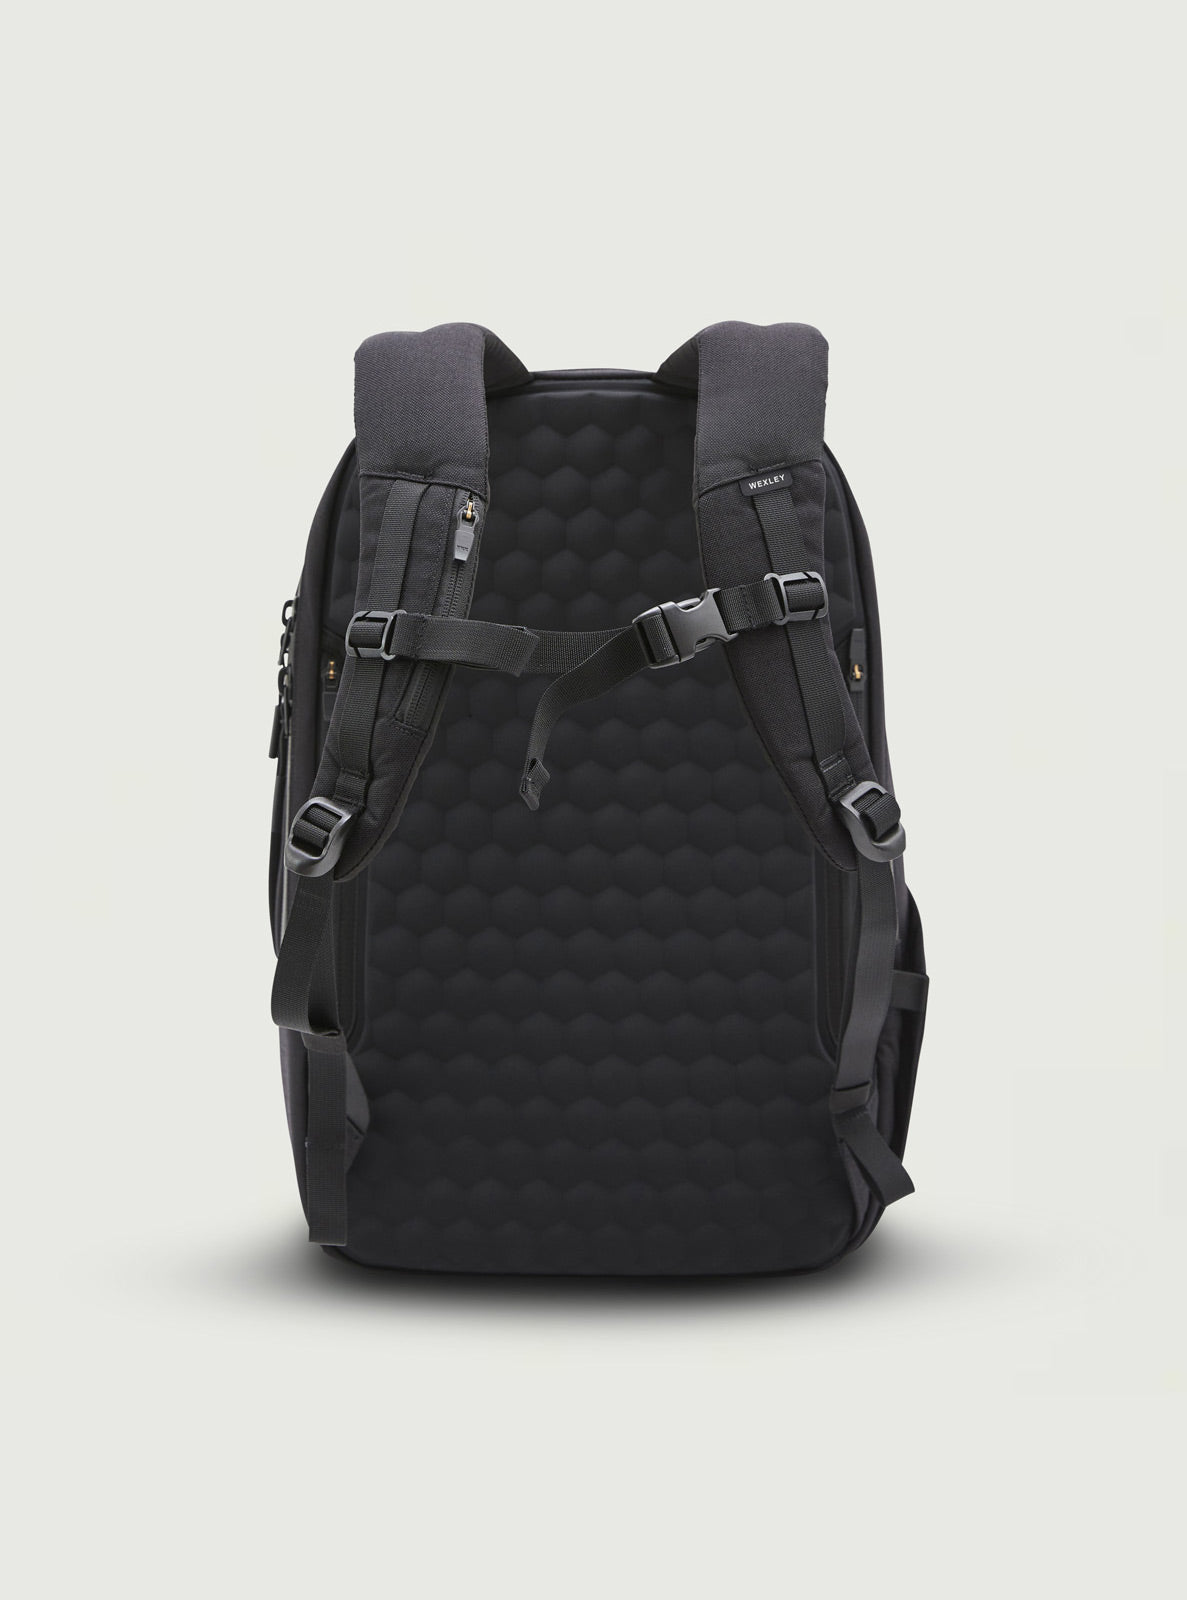 ACTIVE | BUSINESS PACK CORDURA® SERIES